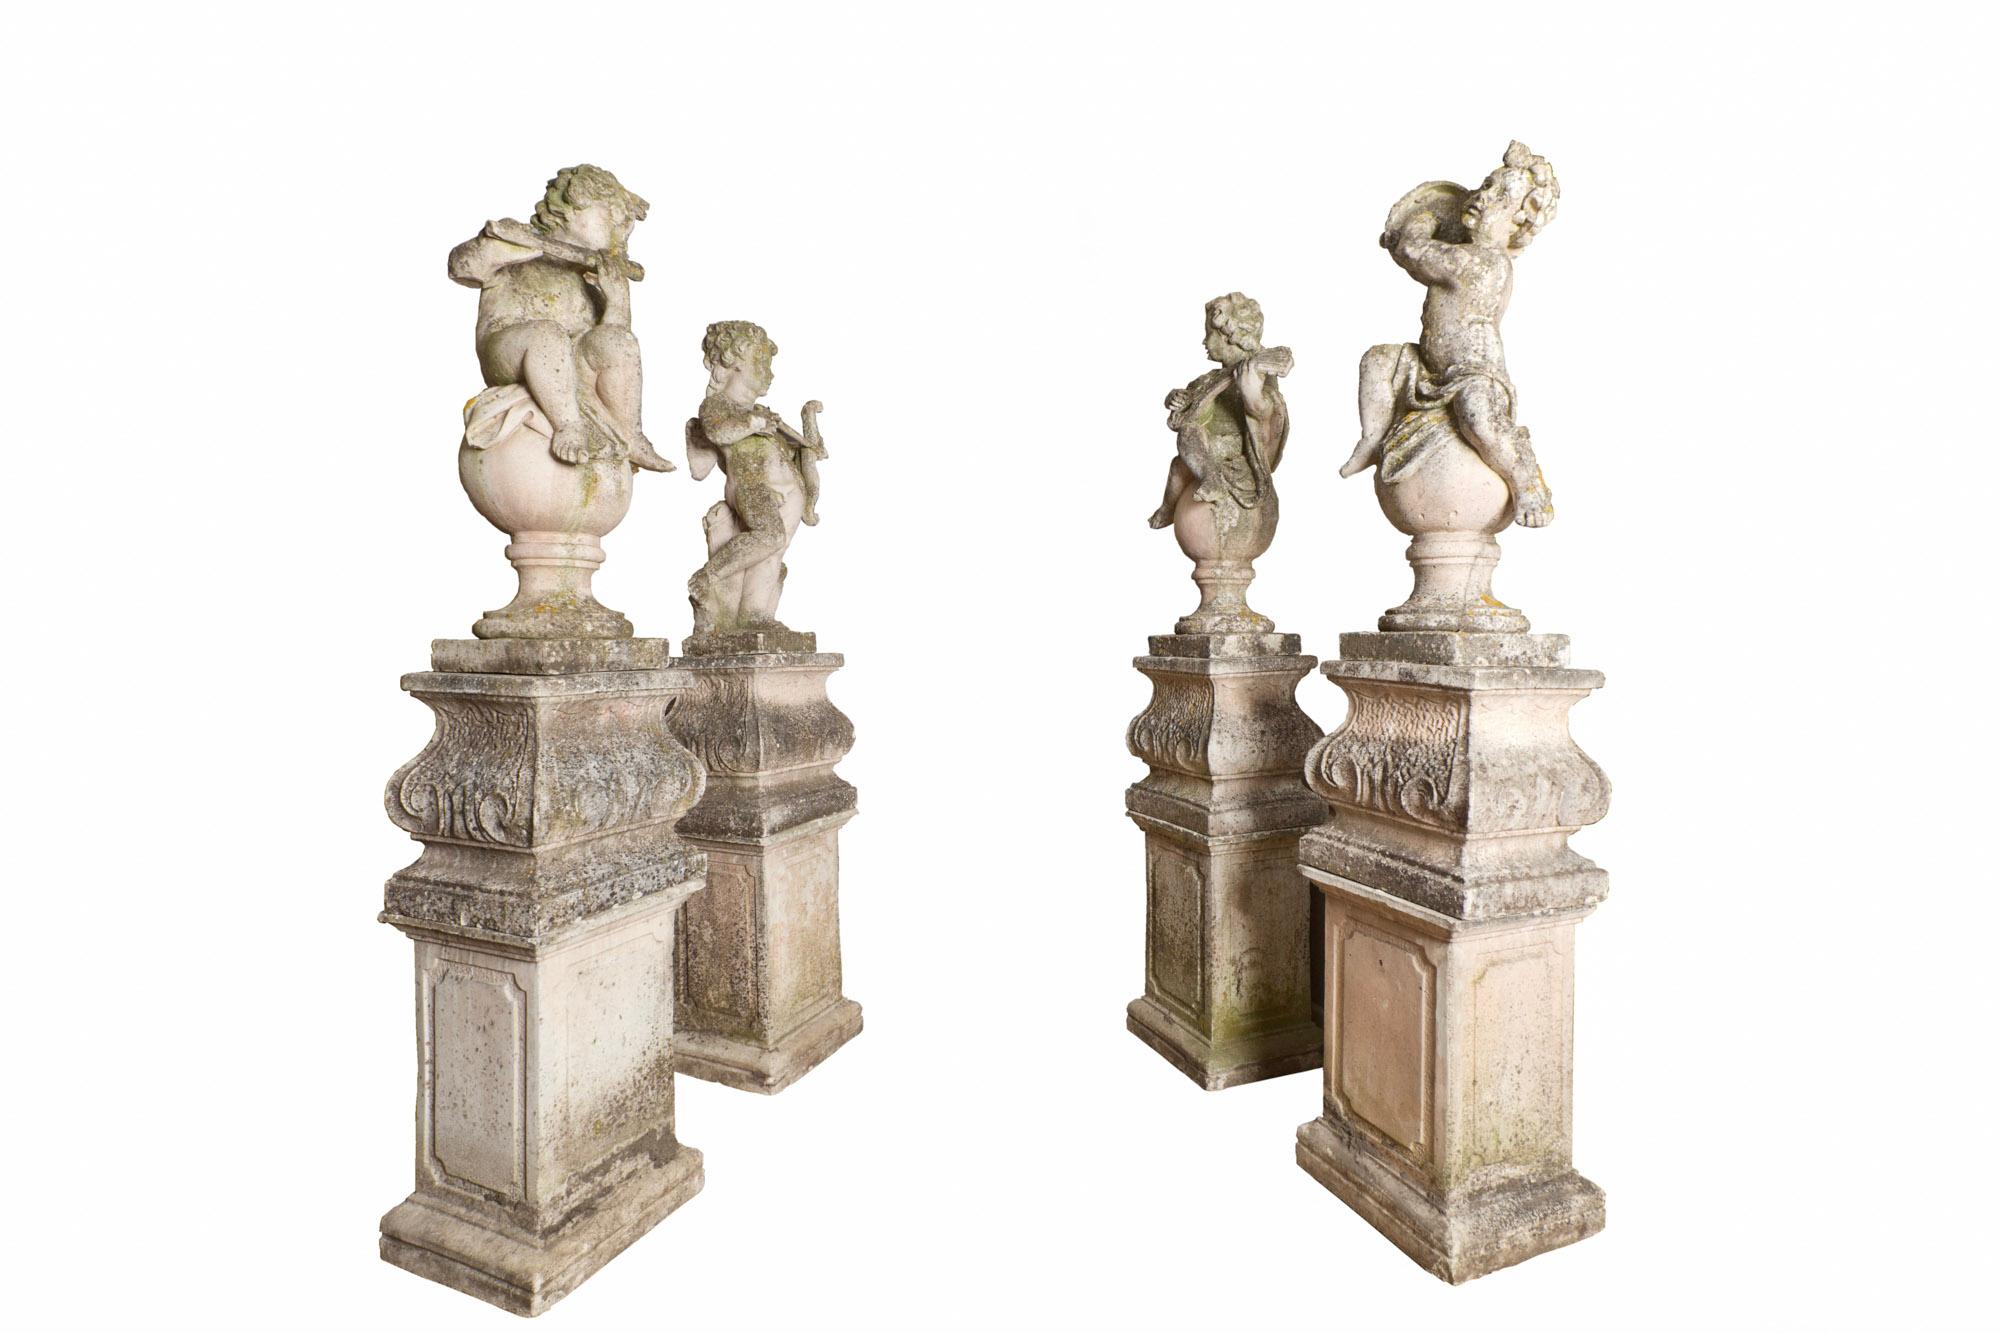 Late 19th century set of four Baroque style cast stone putti, each figure modelled playing a different instrument; flute, lute, and tambourine. One sole Putti represents cupid holding his bow and arrow aloft. The collection of Putti are variously